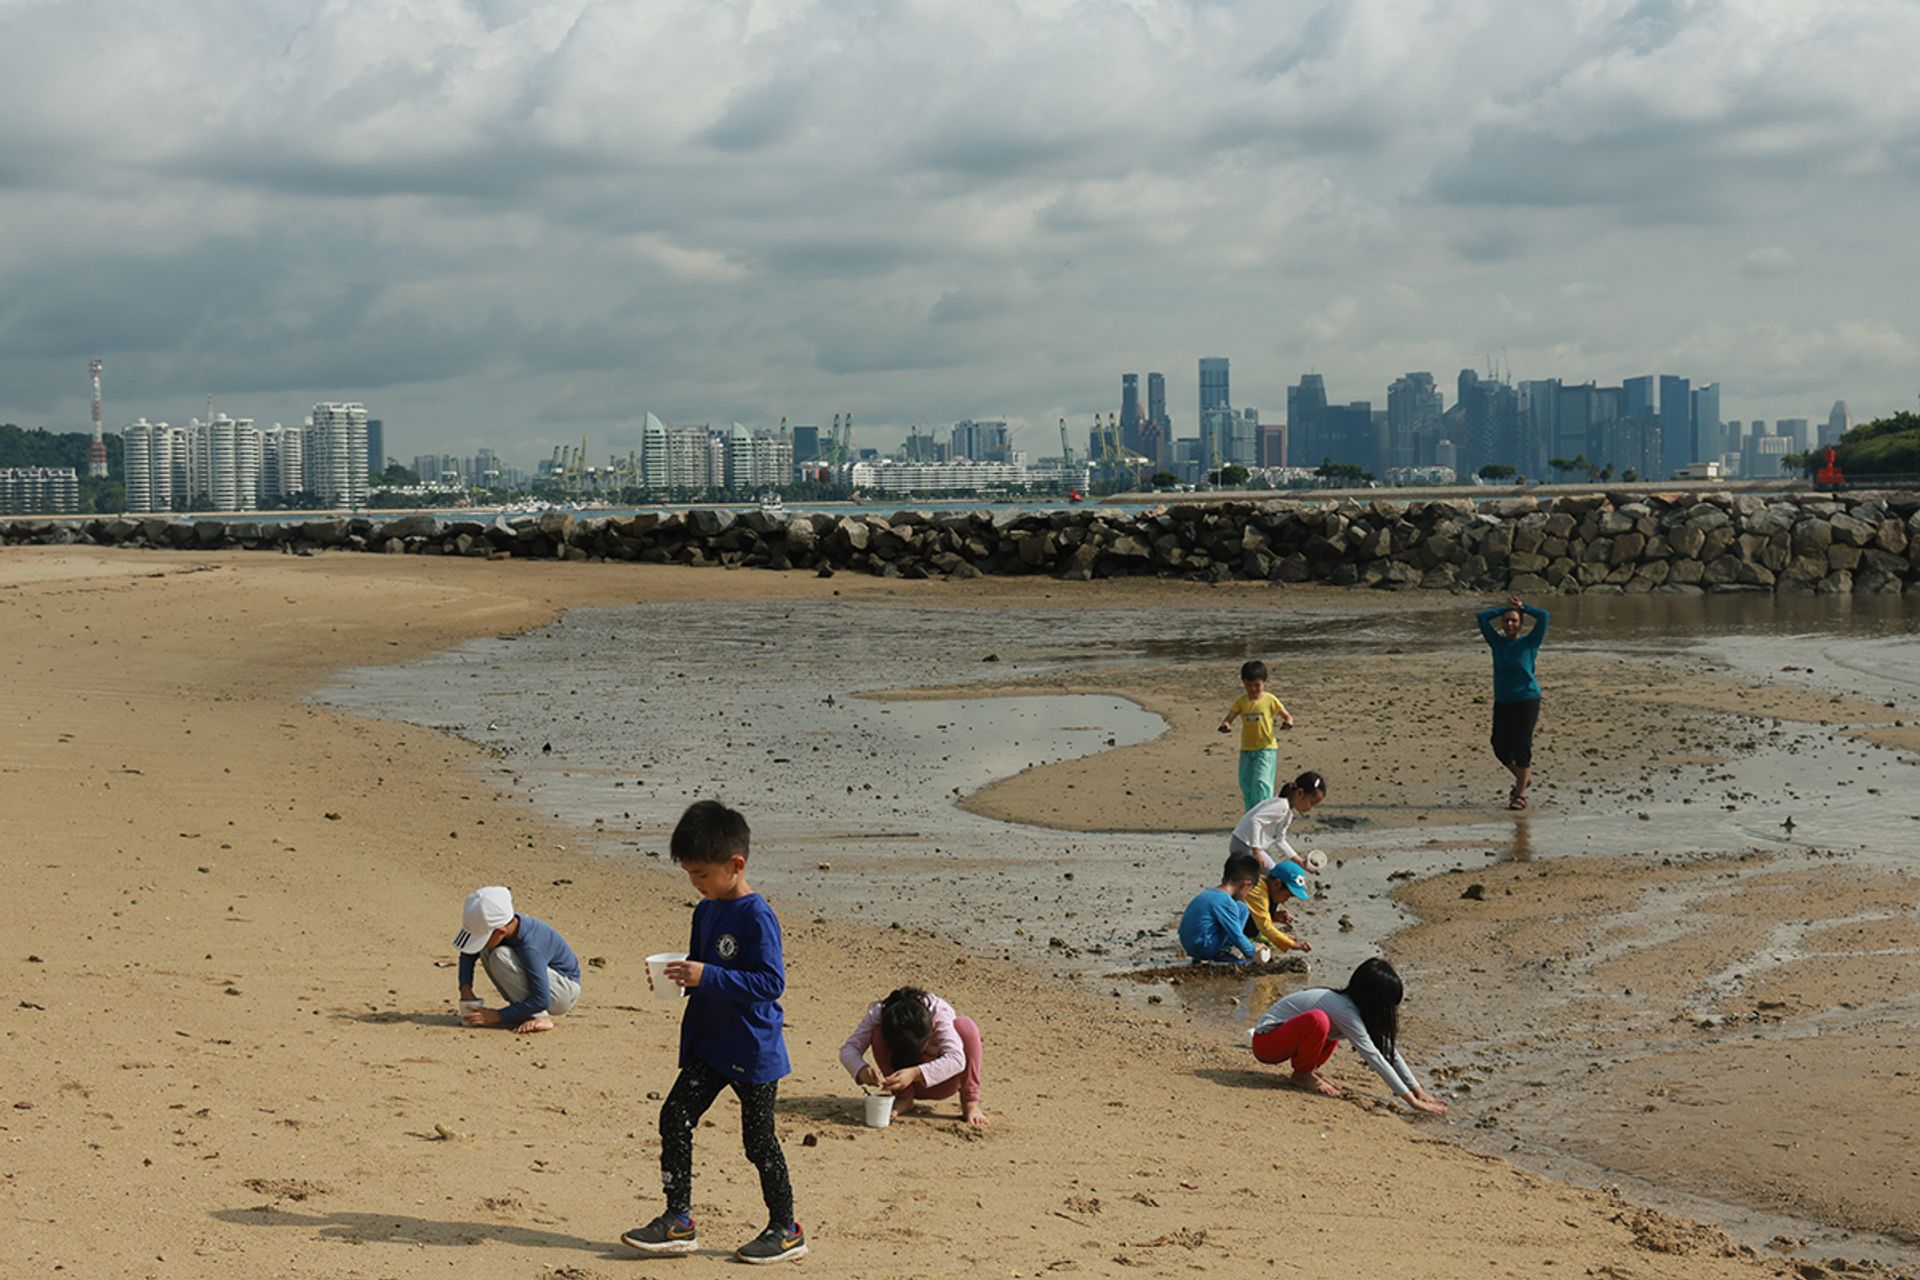 Before leaving the campsite, the children engage in sand play by the beach as they explore tiny crabs and other sea creatures.